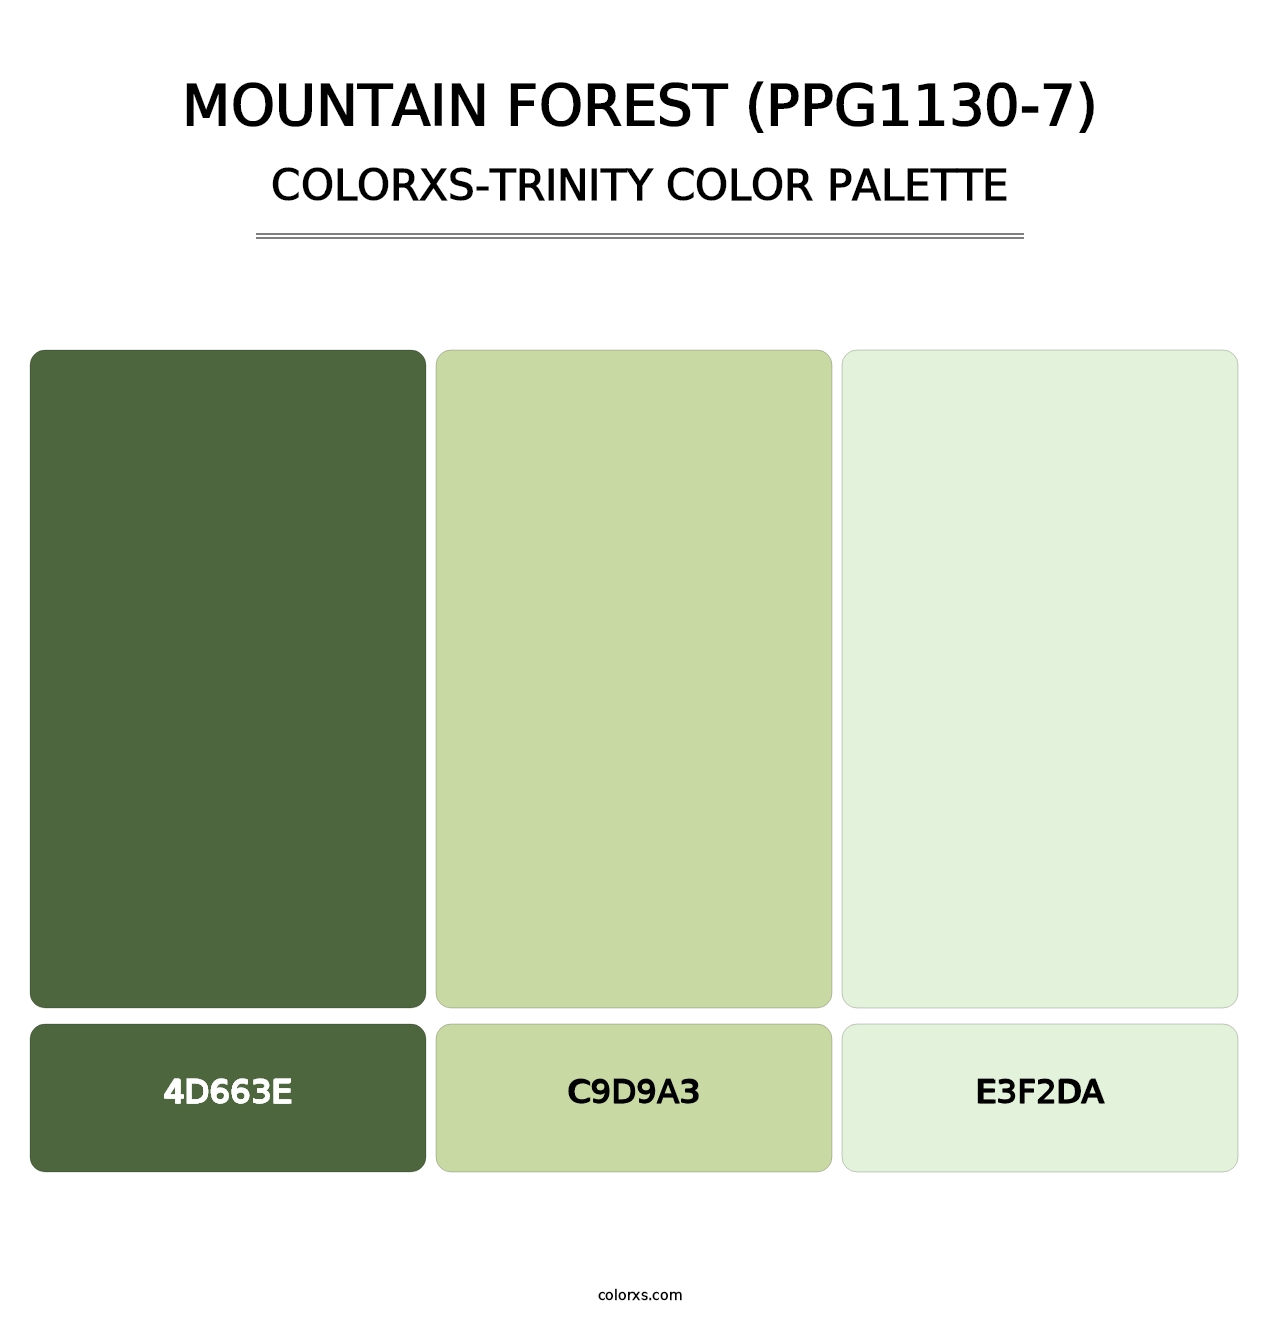 Mountain Forest (PPG1130-7) - Colorxs Trinity Palette